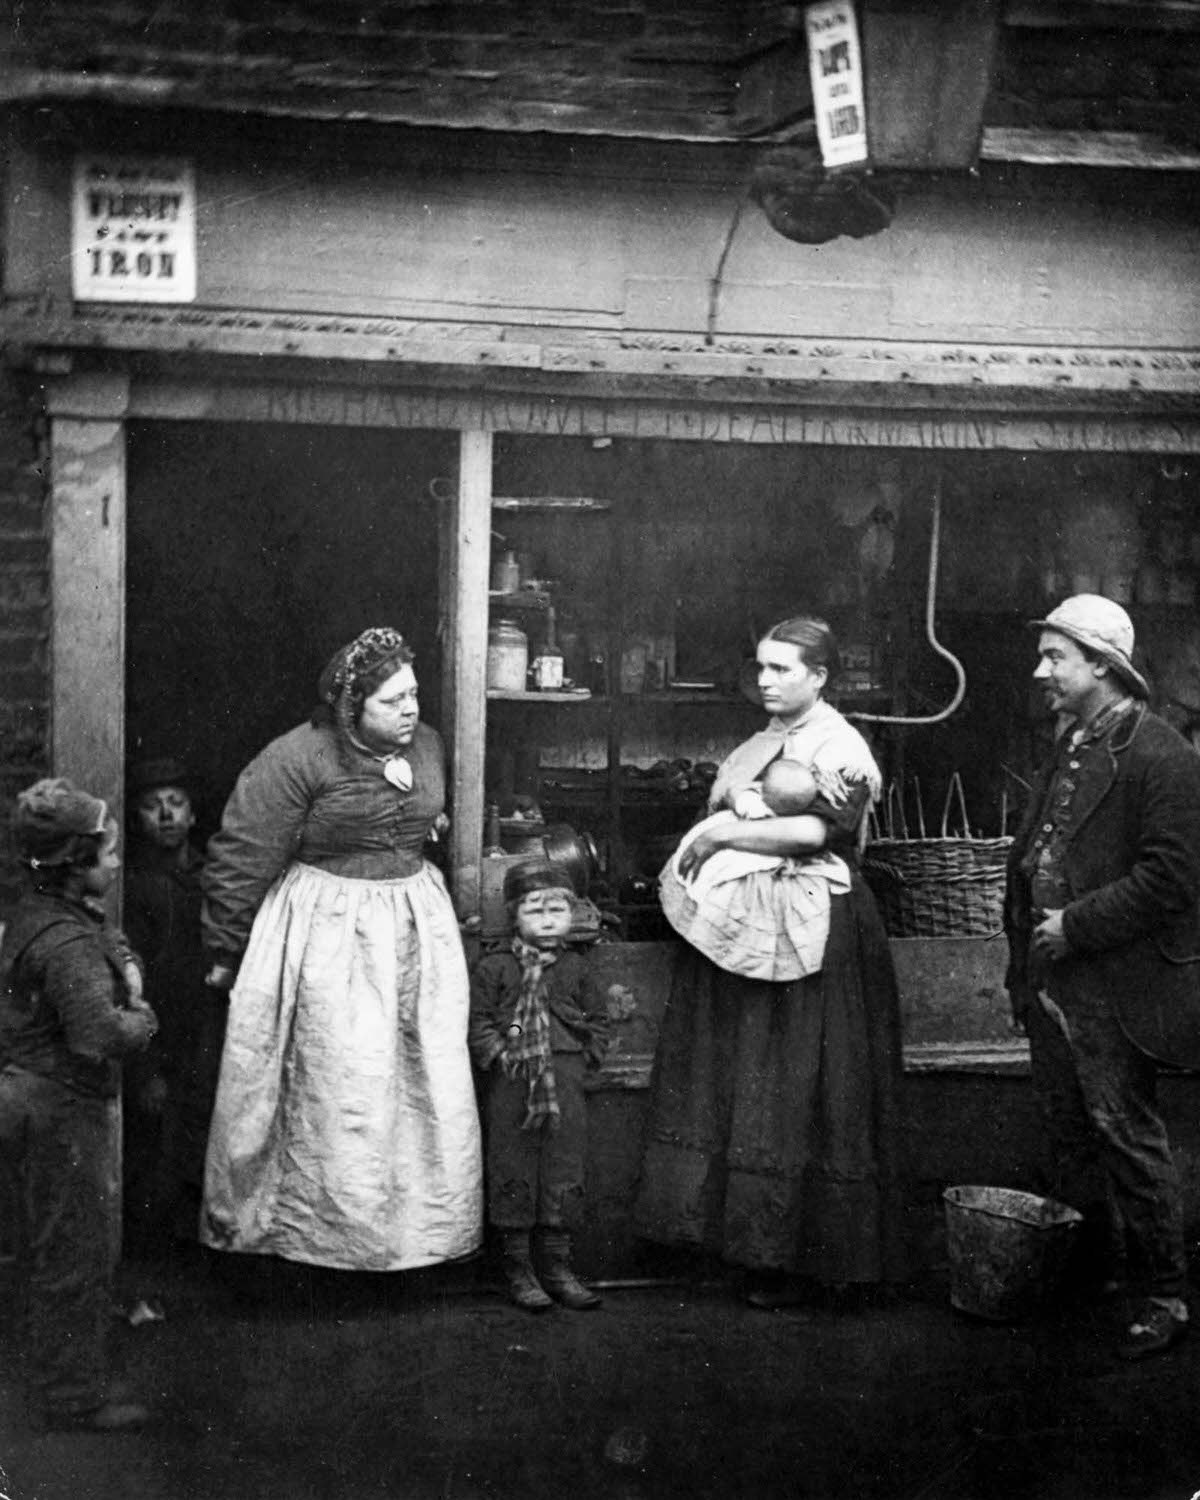 People in front of a rag shop in Lambeth, London, where the Thames annual tidal overflow causes hardship to the locals, 1877.